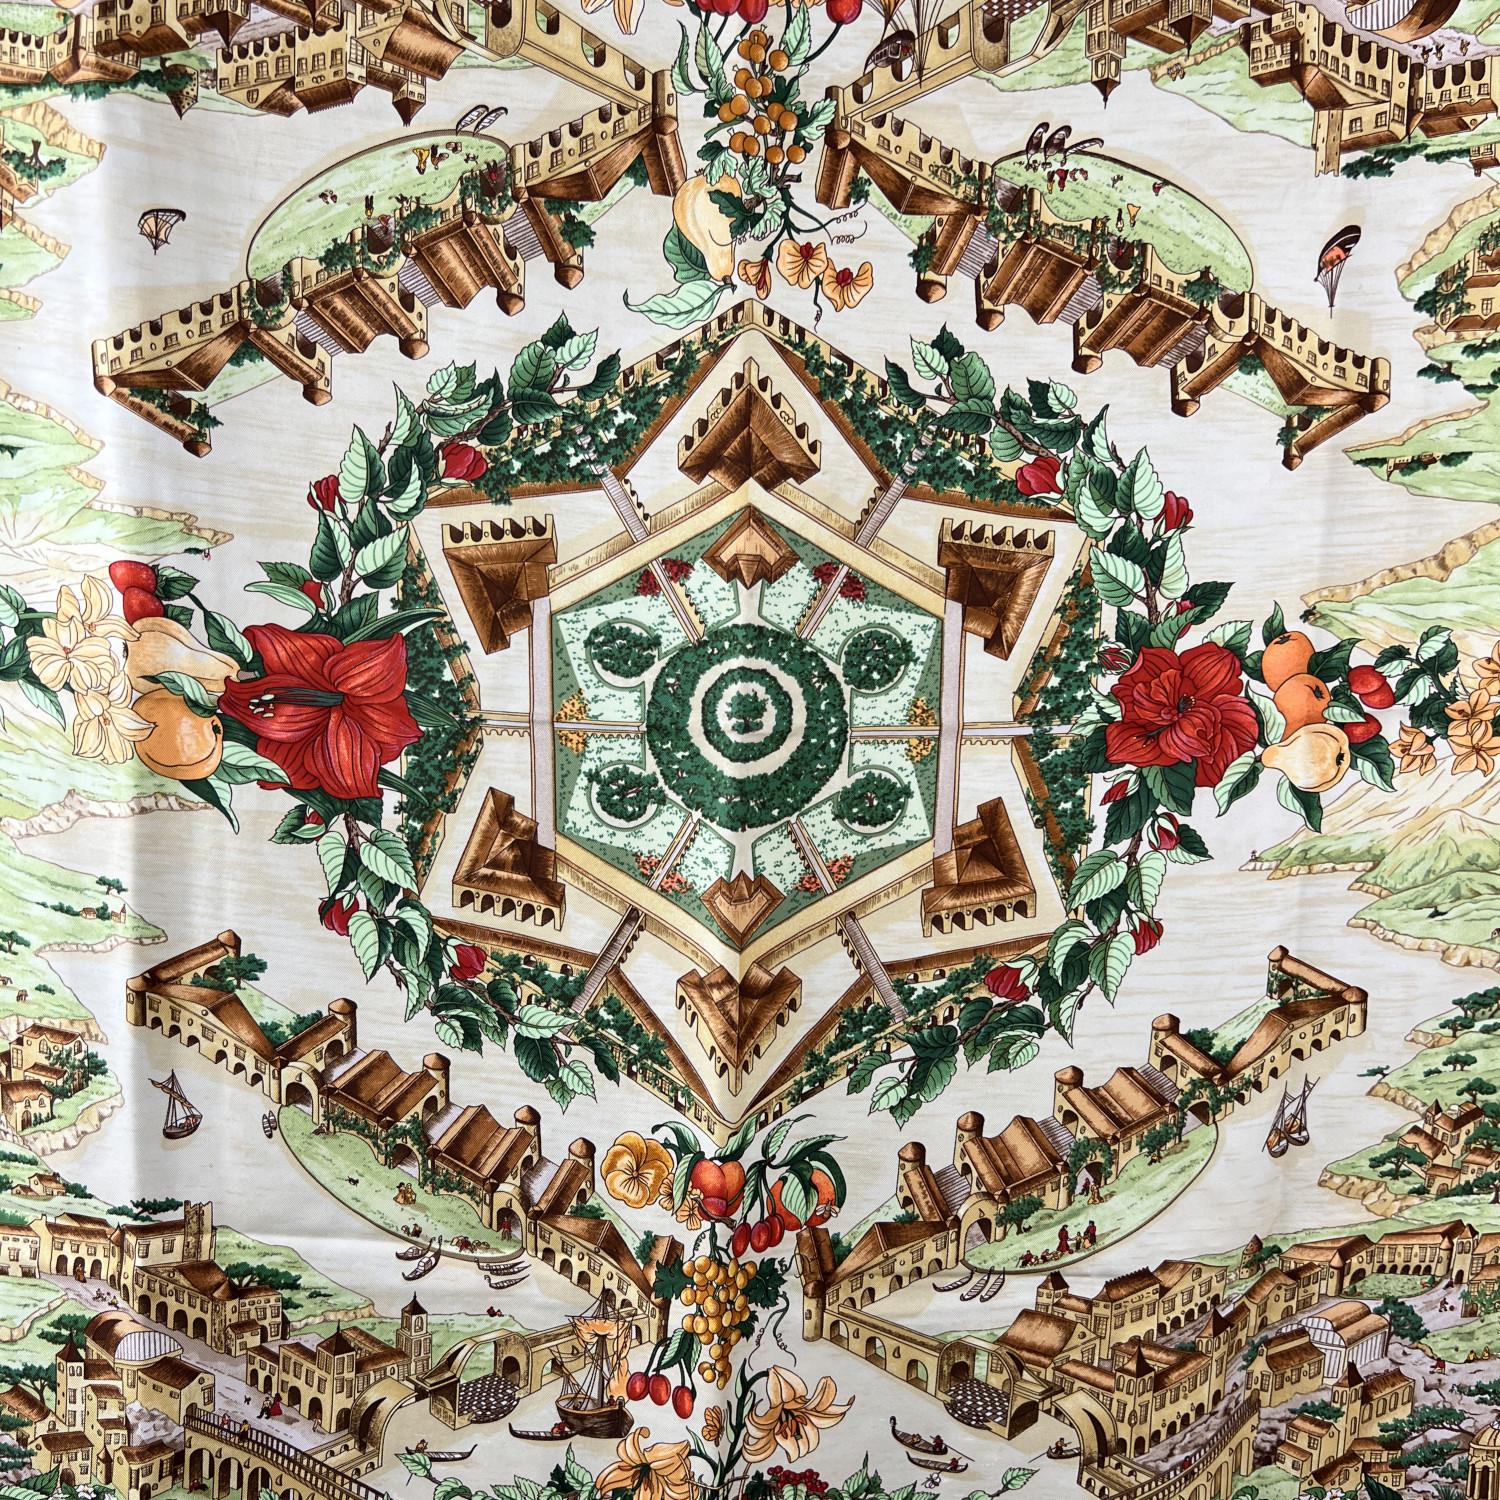 HERMES Silk scarf named 'Au Pays de Cocagne', designed by artist Zoe Pauwels and issued for the first time in 2000. The design is inspired by the utopian concept of the 'town of Cuccagna', that is to say an ideal place, mentioned in many texts of